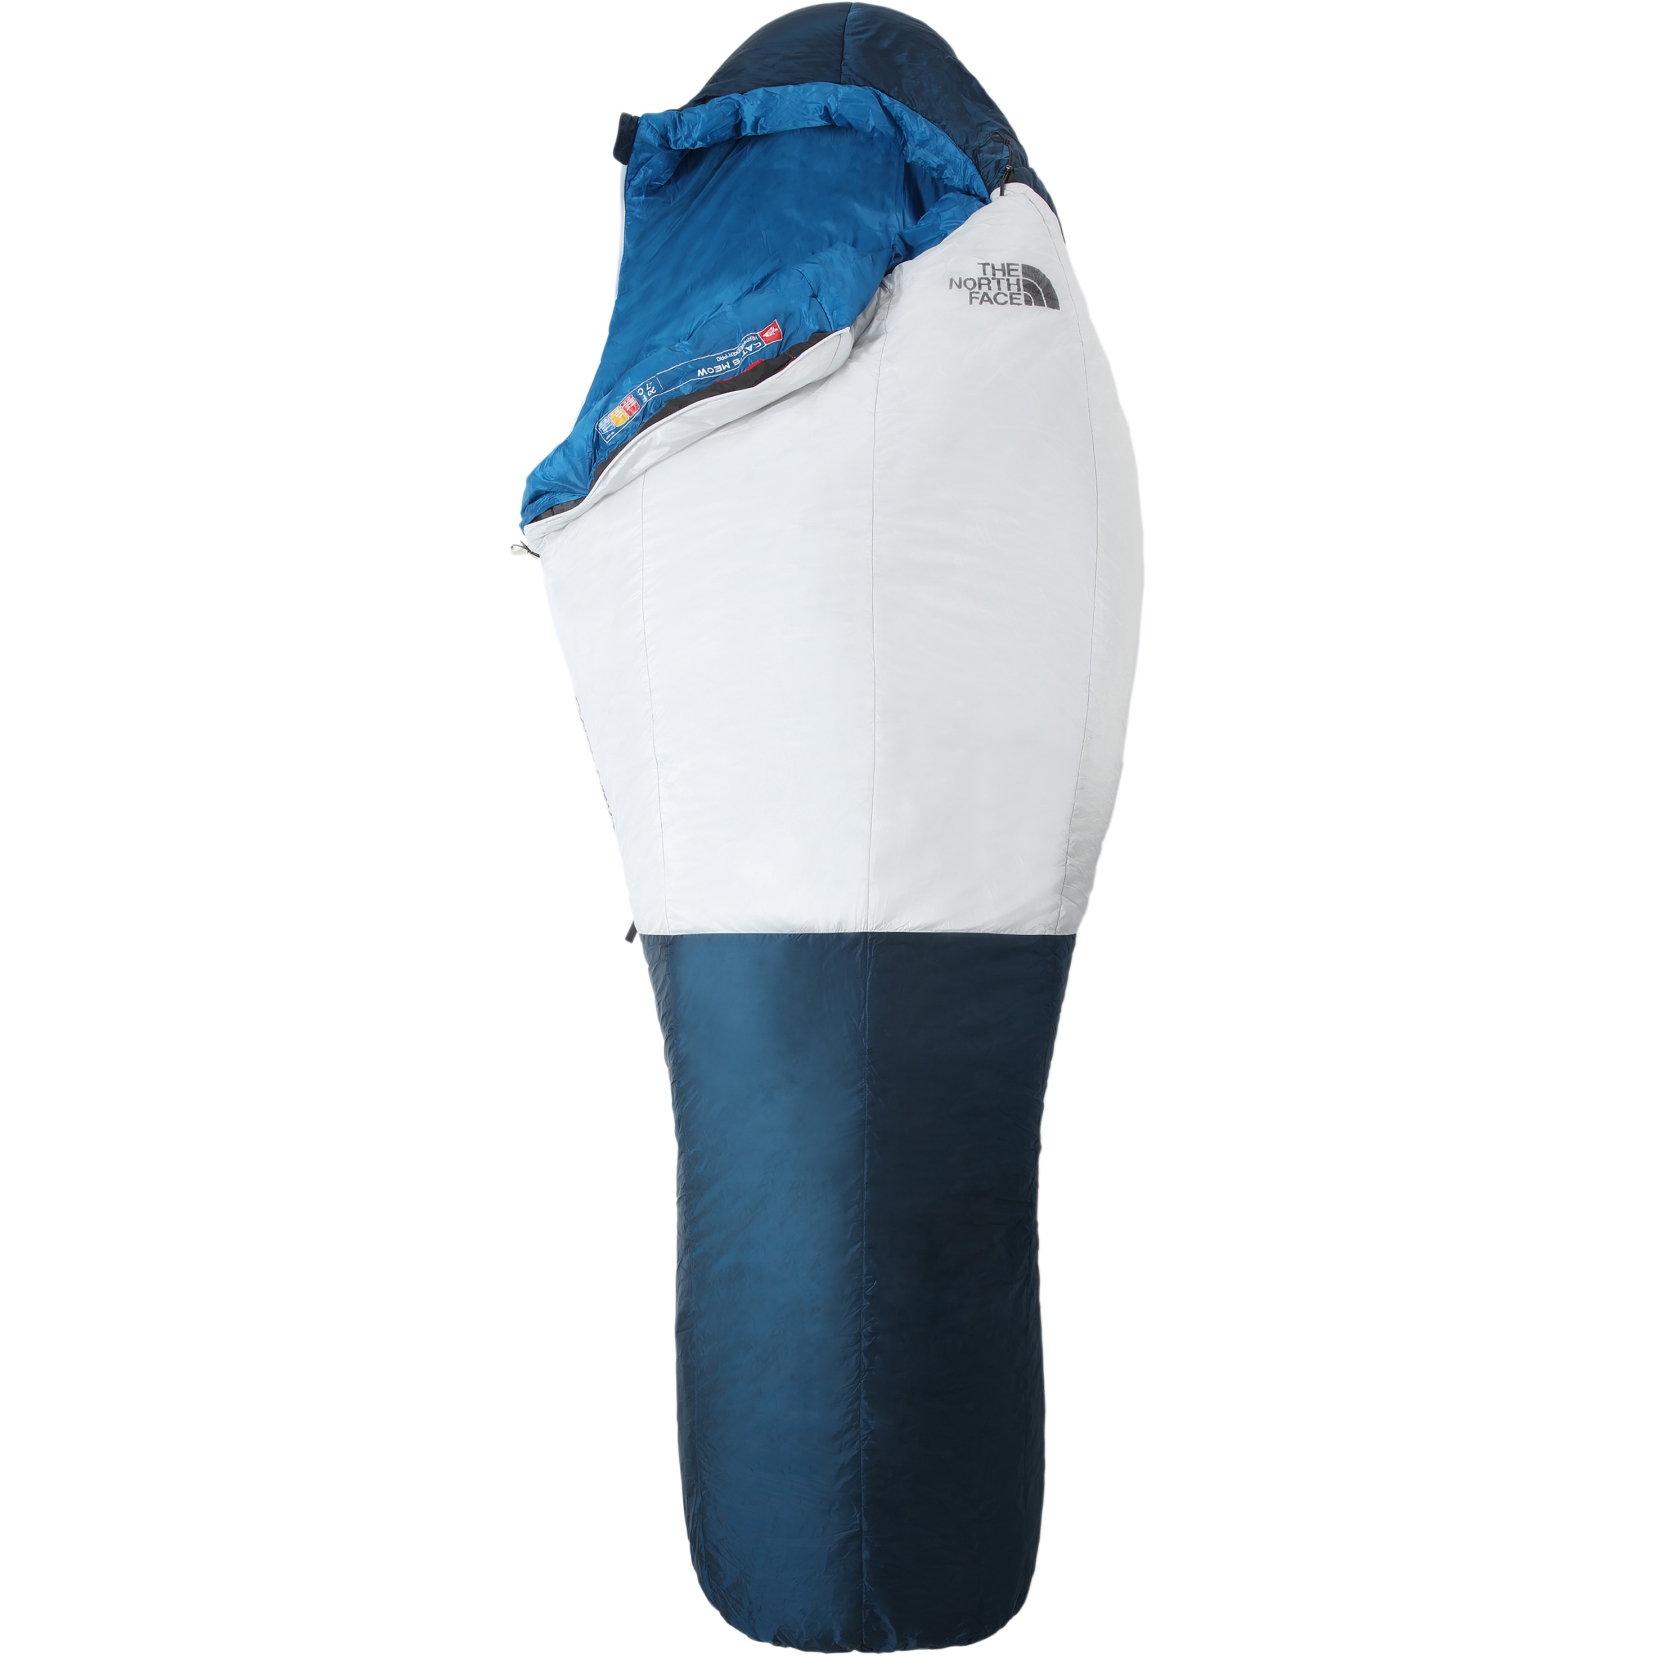 Picture of The North Face Cat&#039;s Meow Eco Sleeping Bag - Regular - Right zip - Banff Blue/Tin Grey